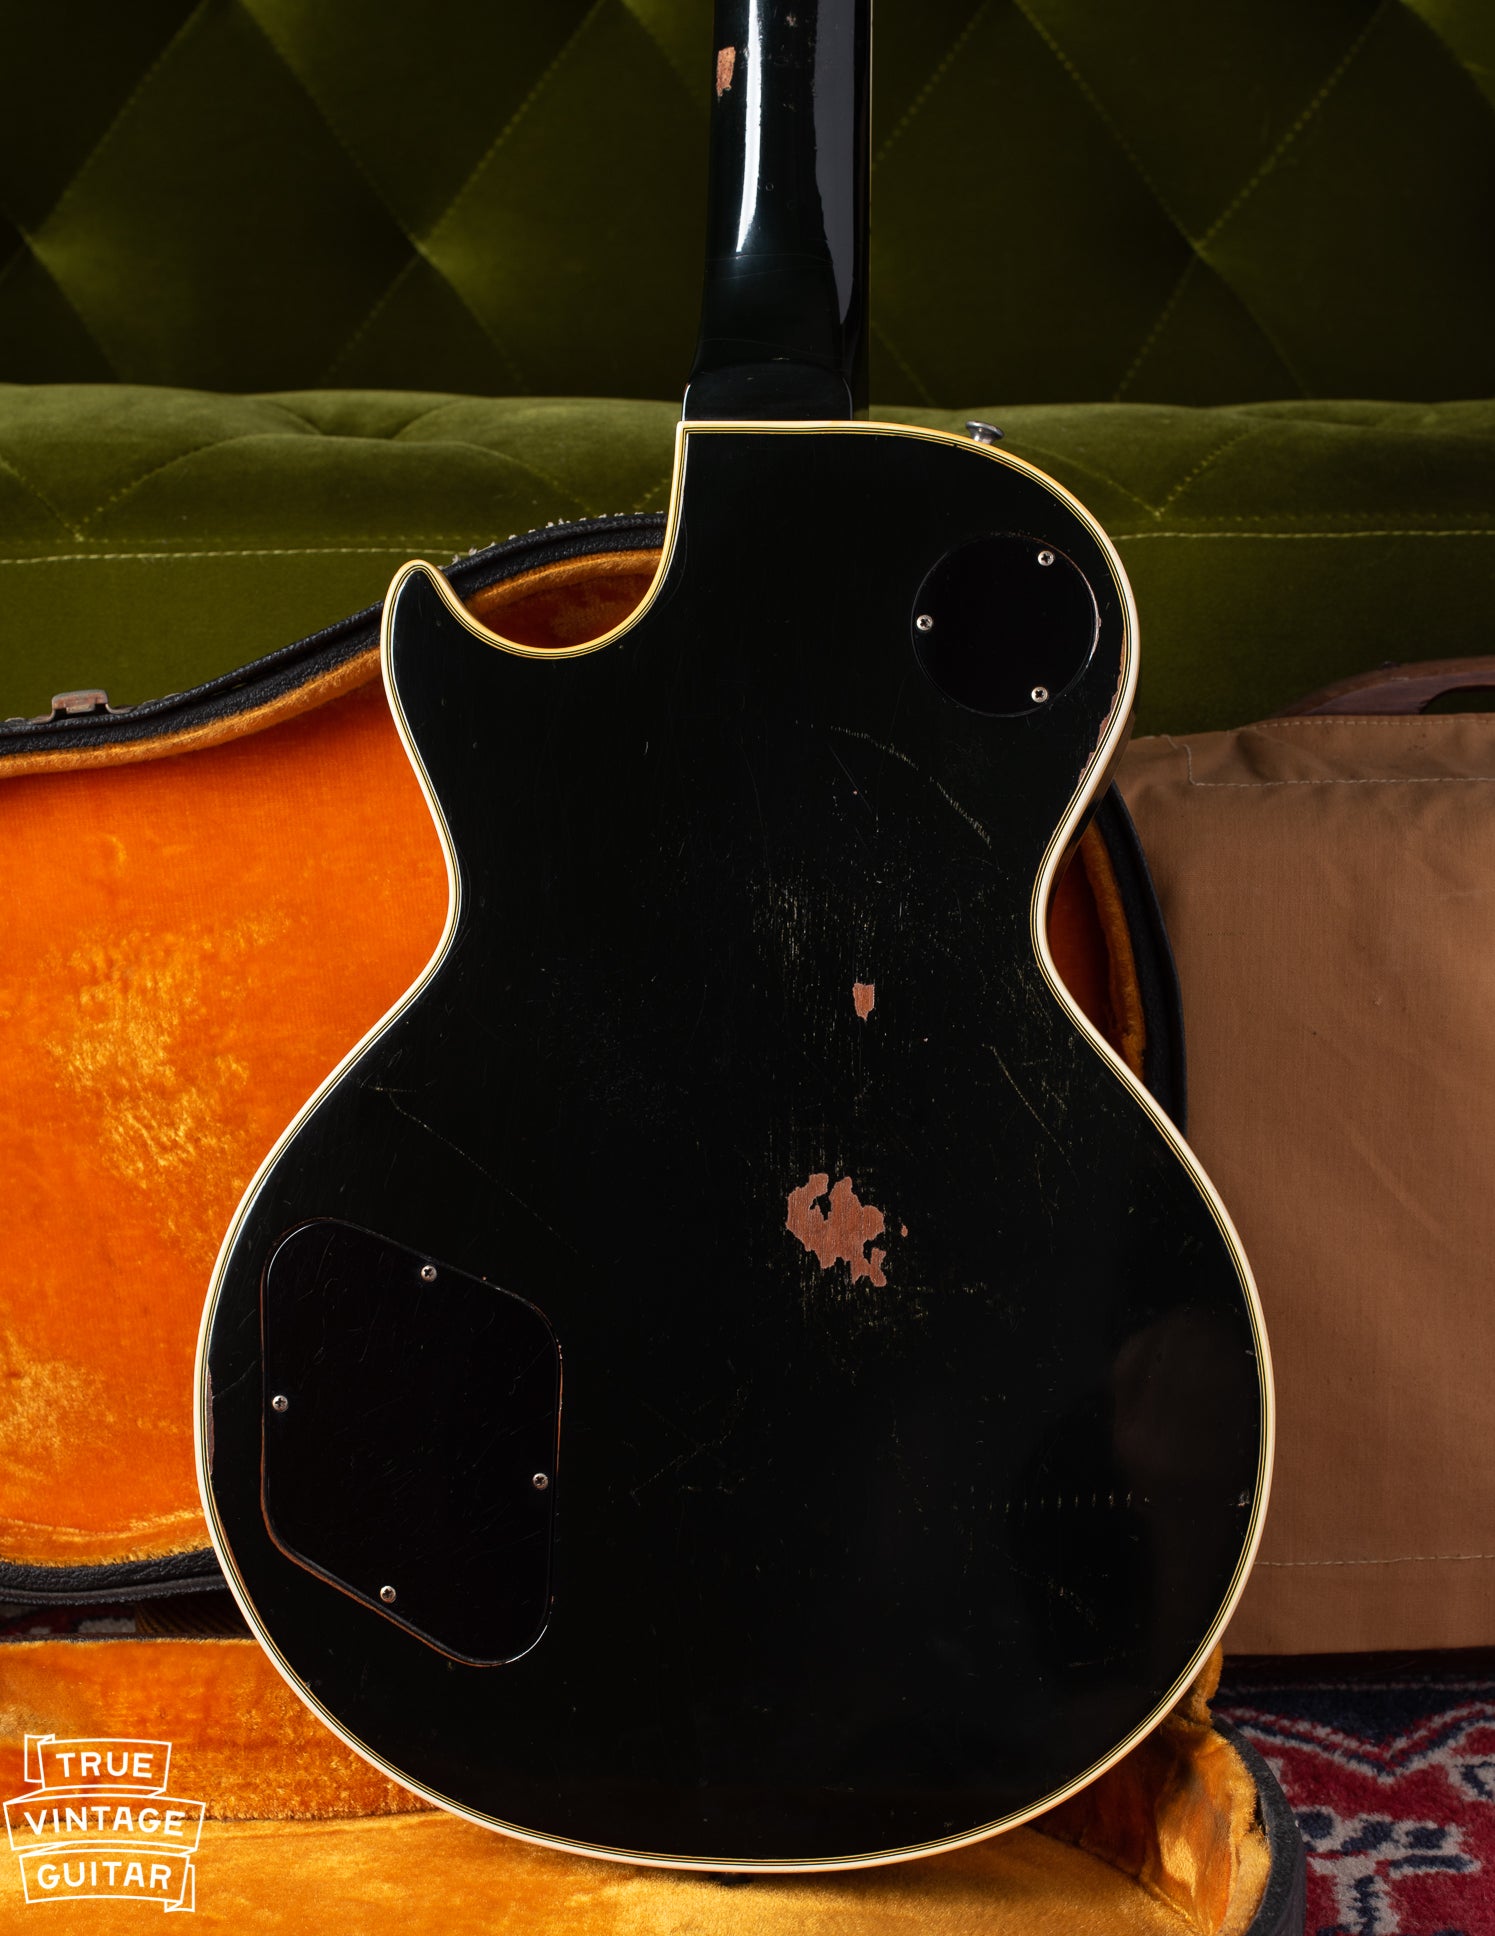 Back of body of 1969 Gibson Les Paul Custom black guitar with gold parts..